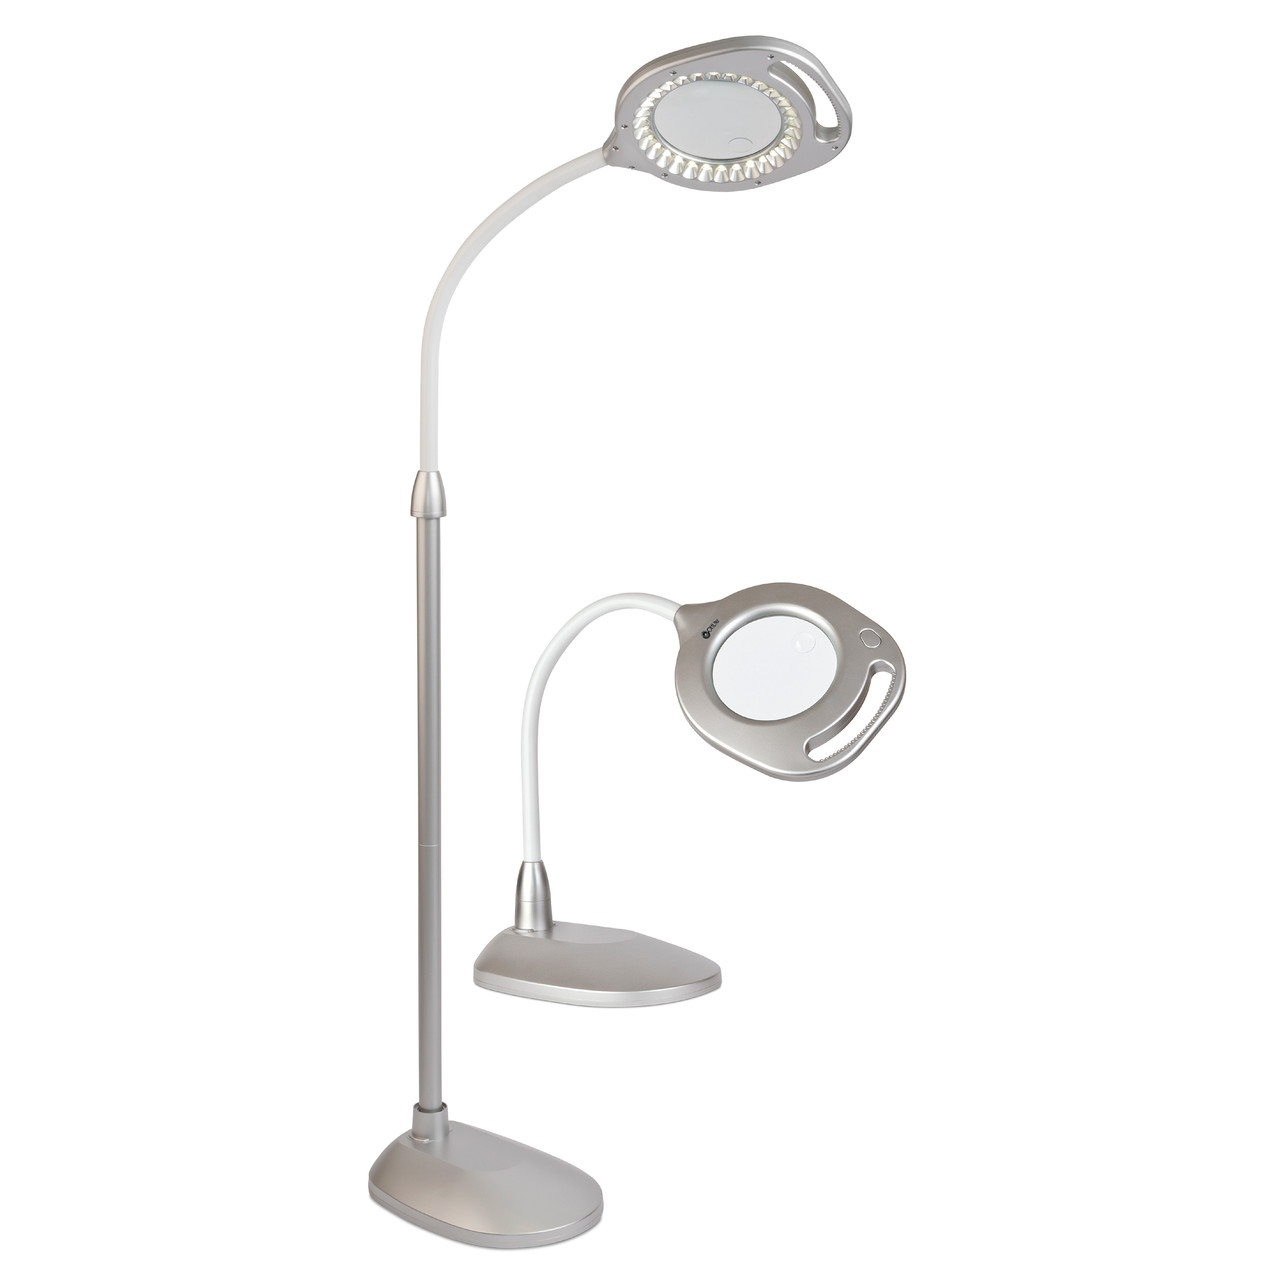 OttLite ClearSun® LED Light Therapy Lamp